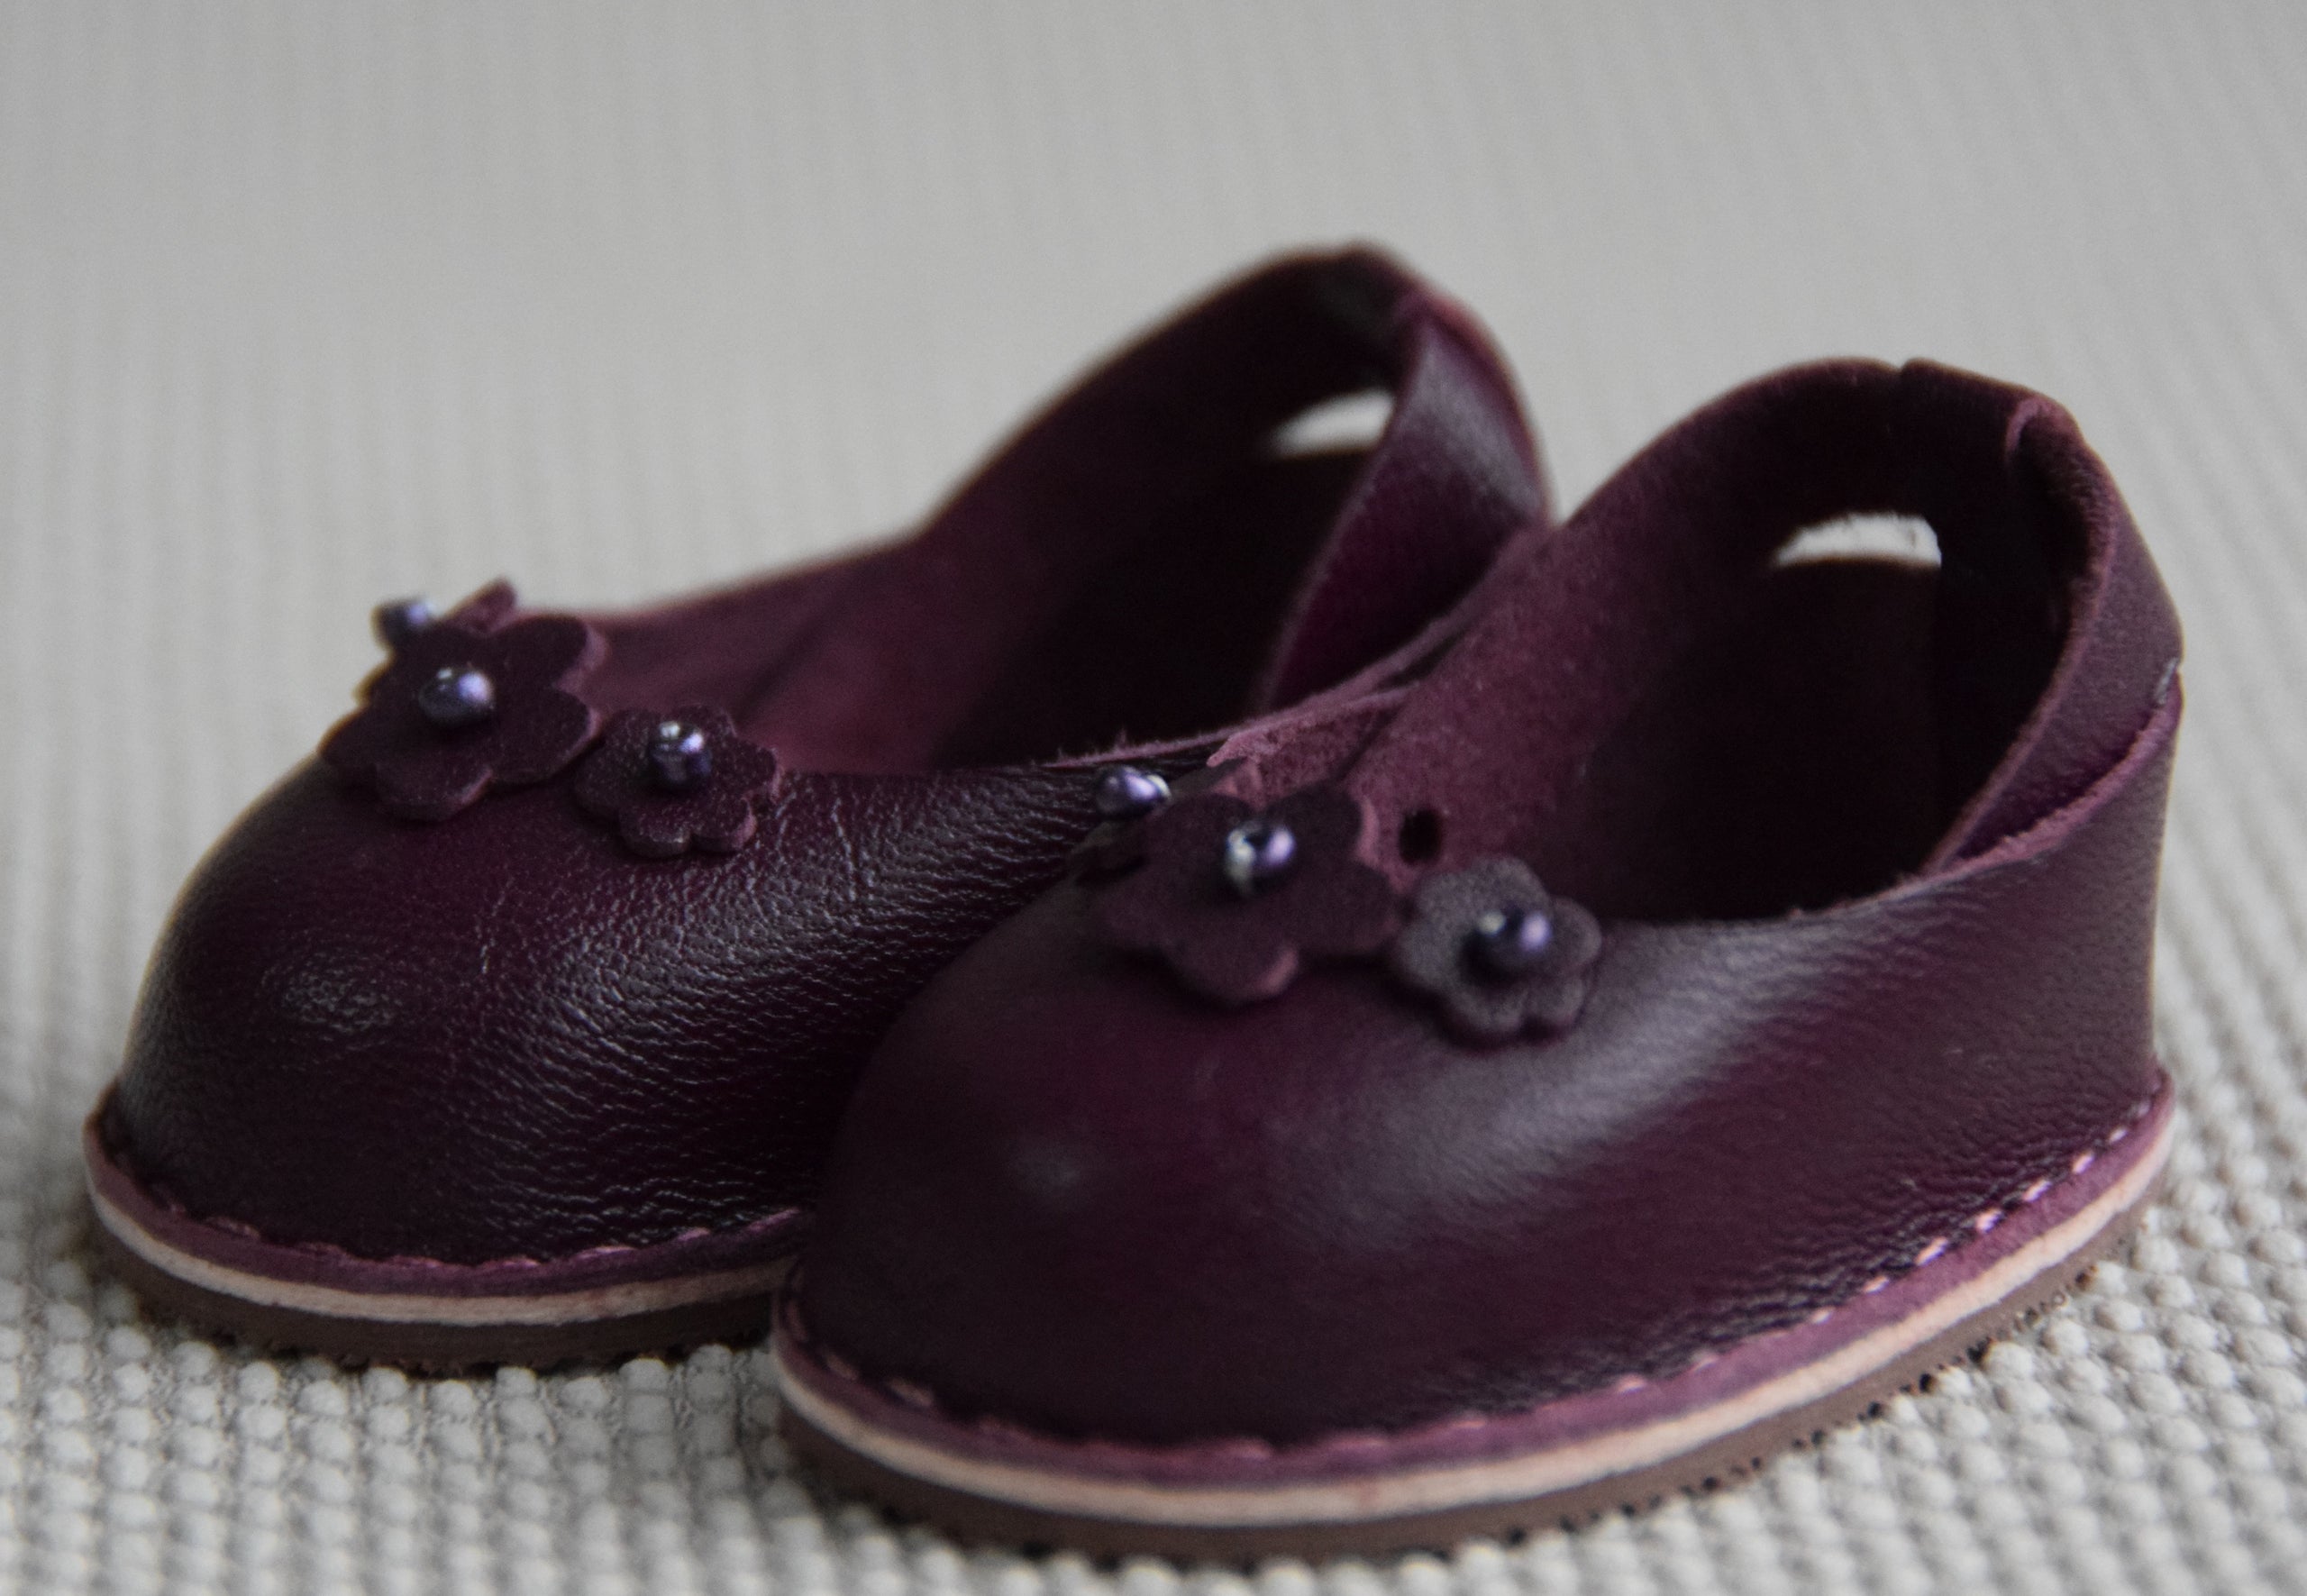 Handmade real leather shoes for Sasha Doll Baby